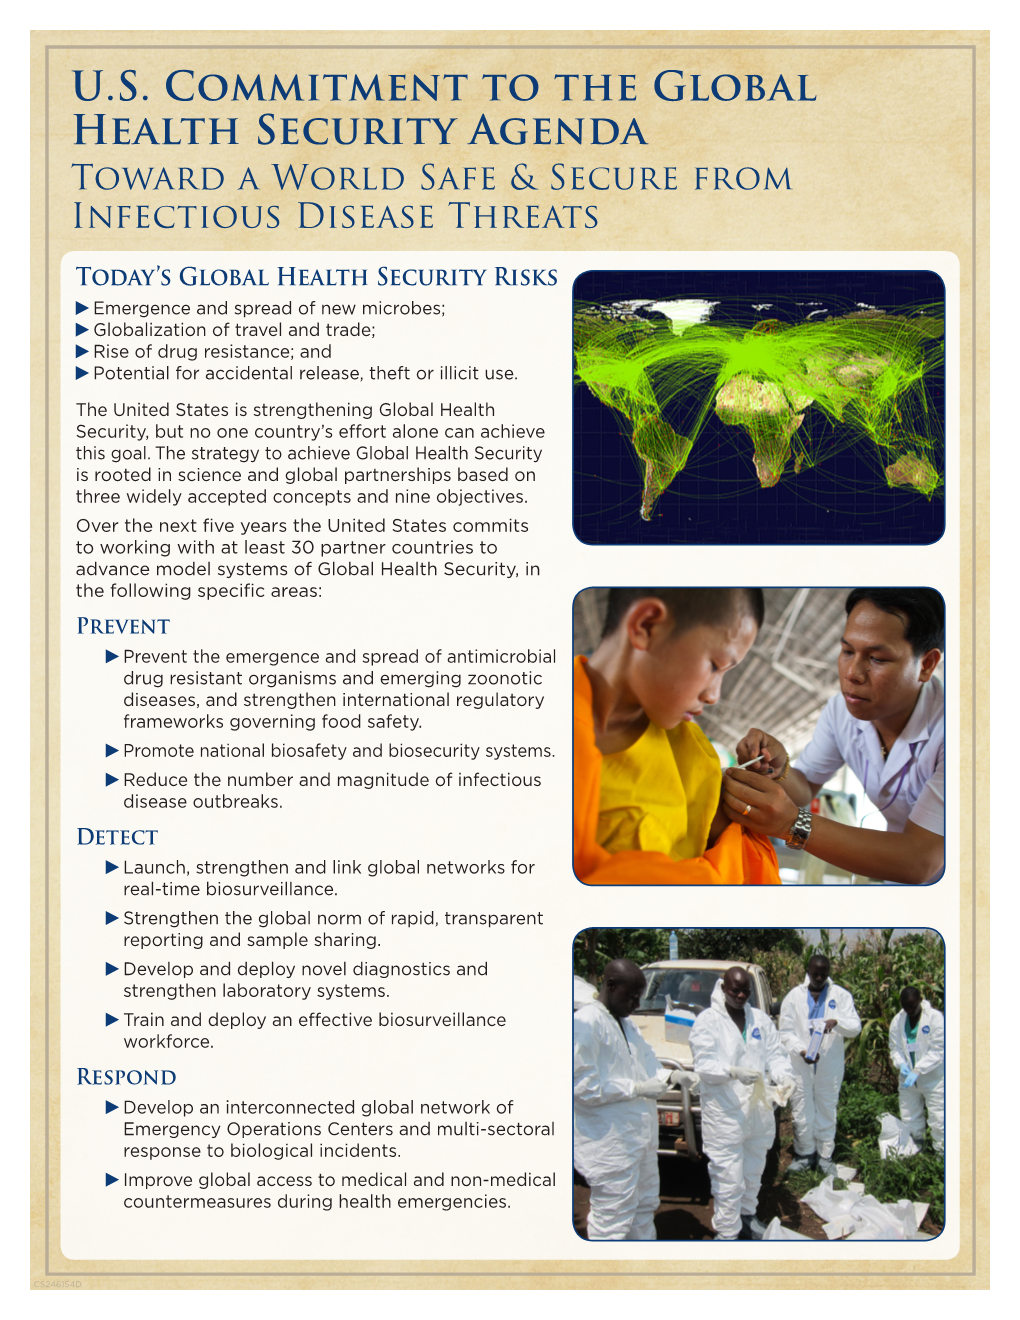 U.S. Commitment to the Global Health Security Agenda Toward a World Safe & Secure from Infectious Disease Threats